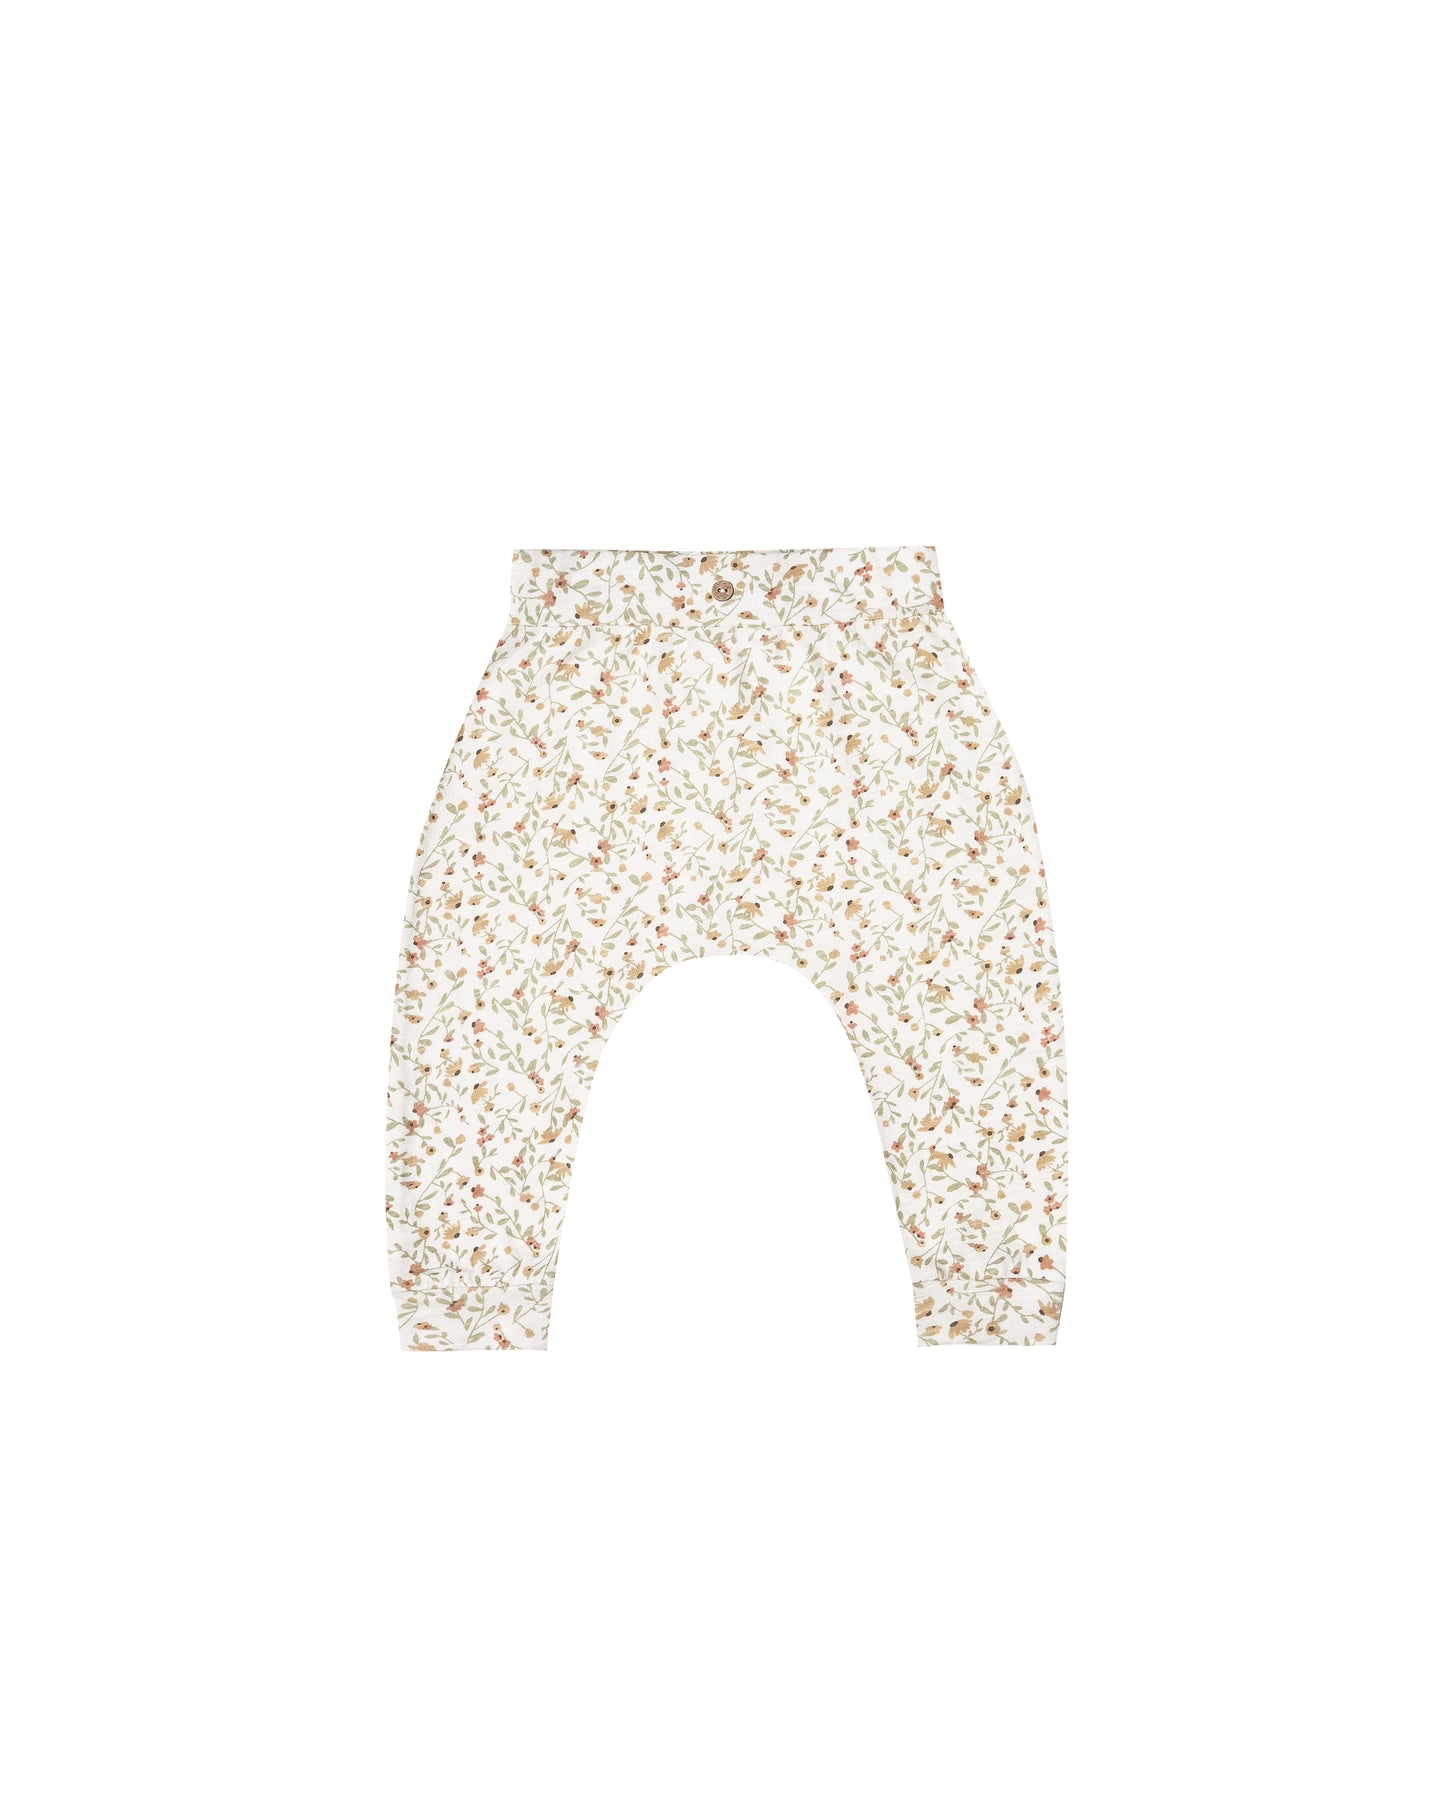 SPRING MEADOW SLOUCH PANT